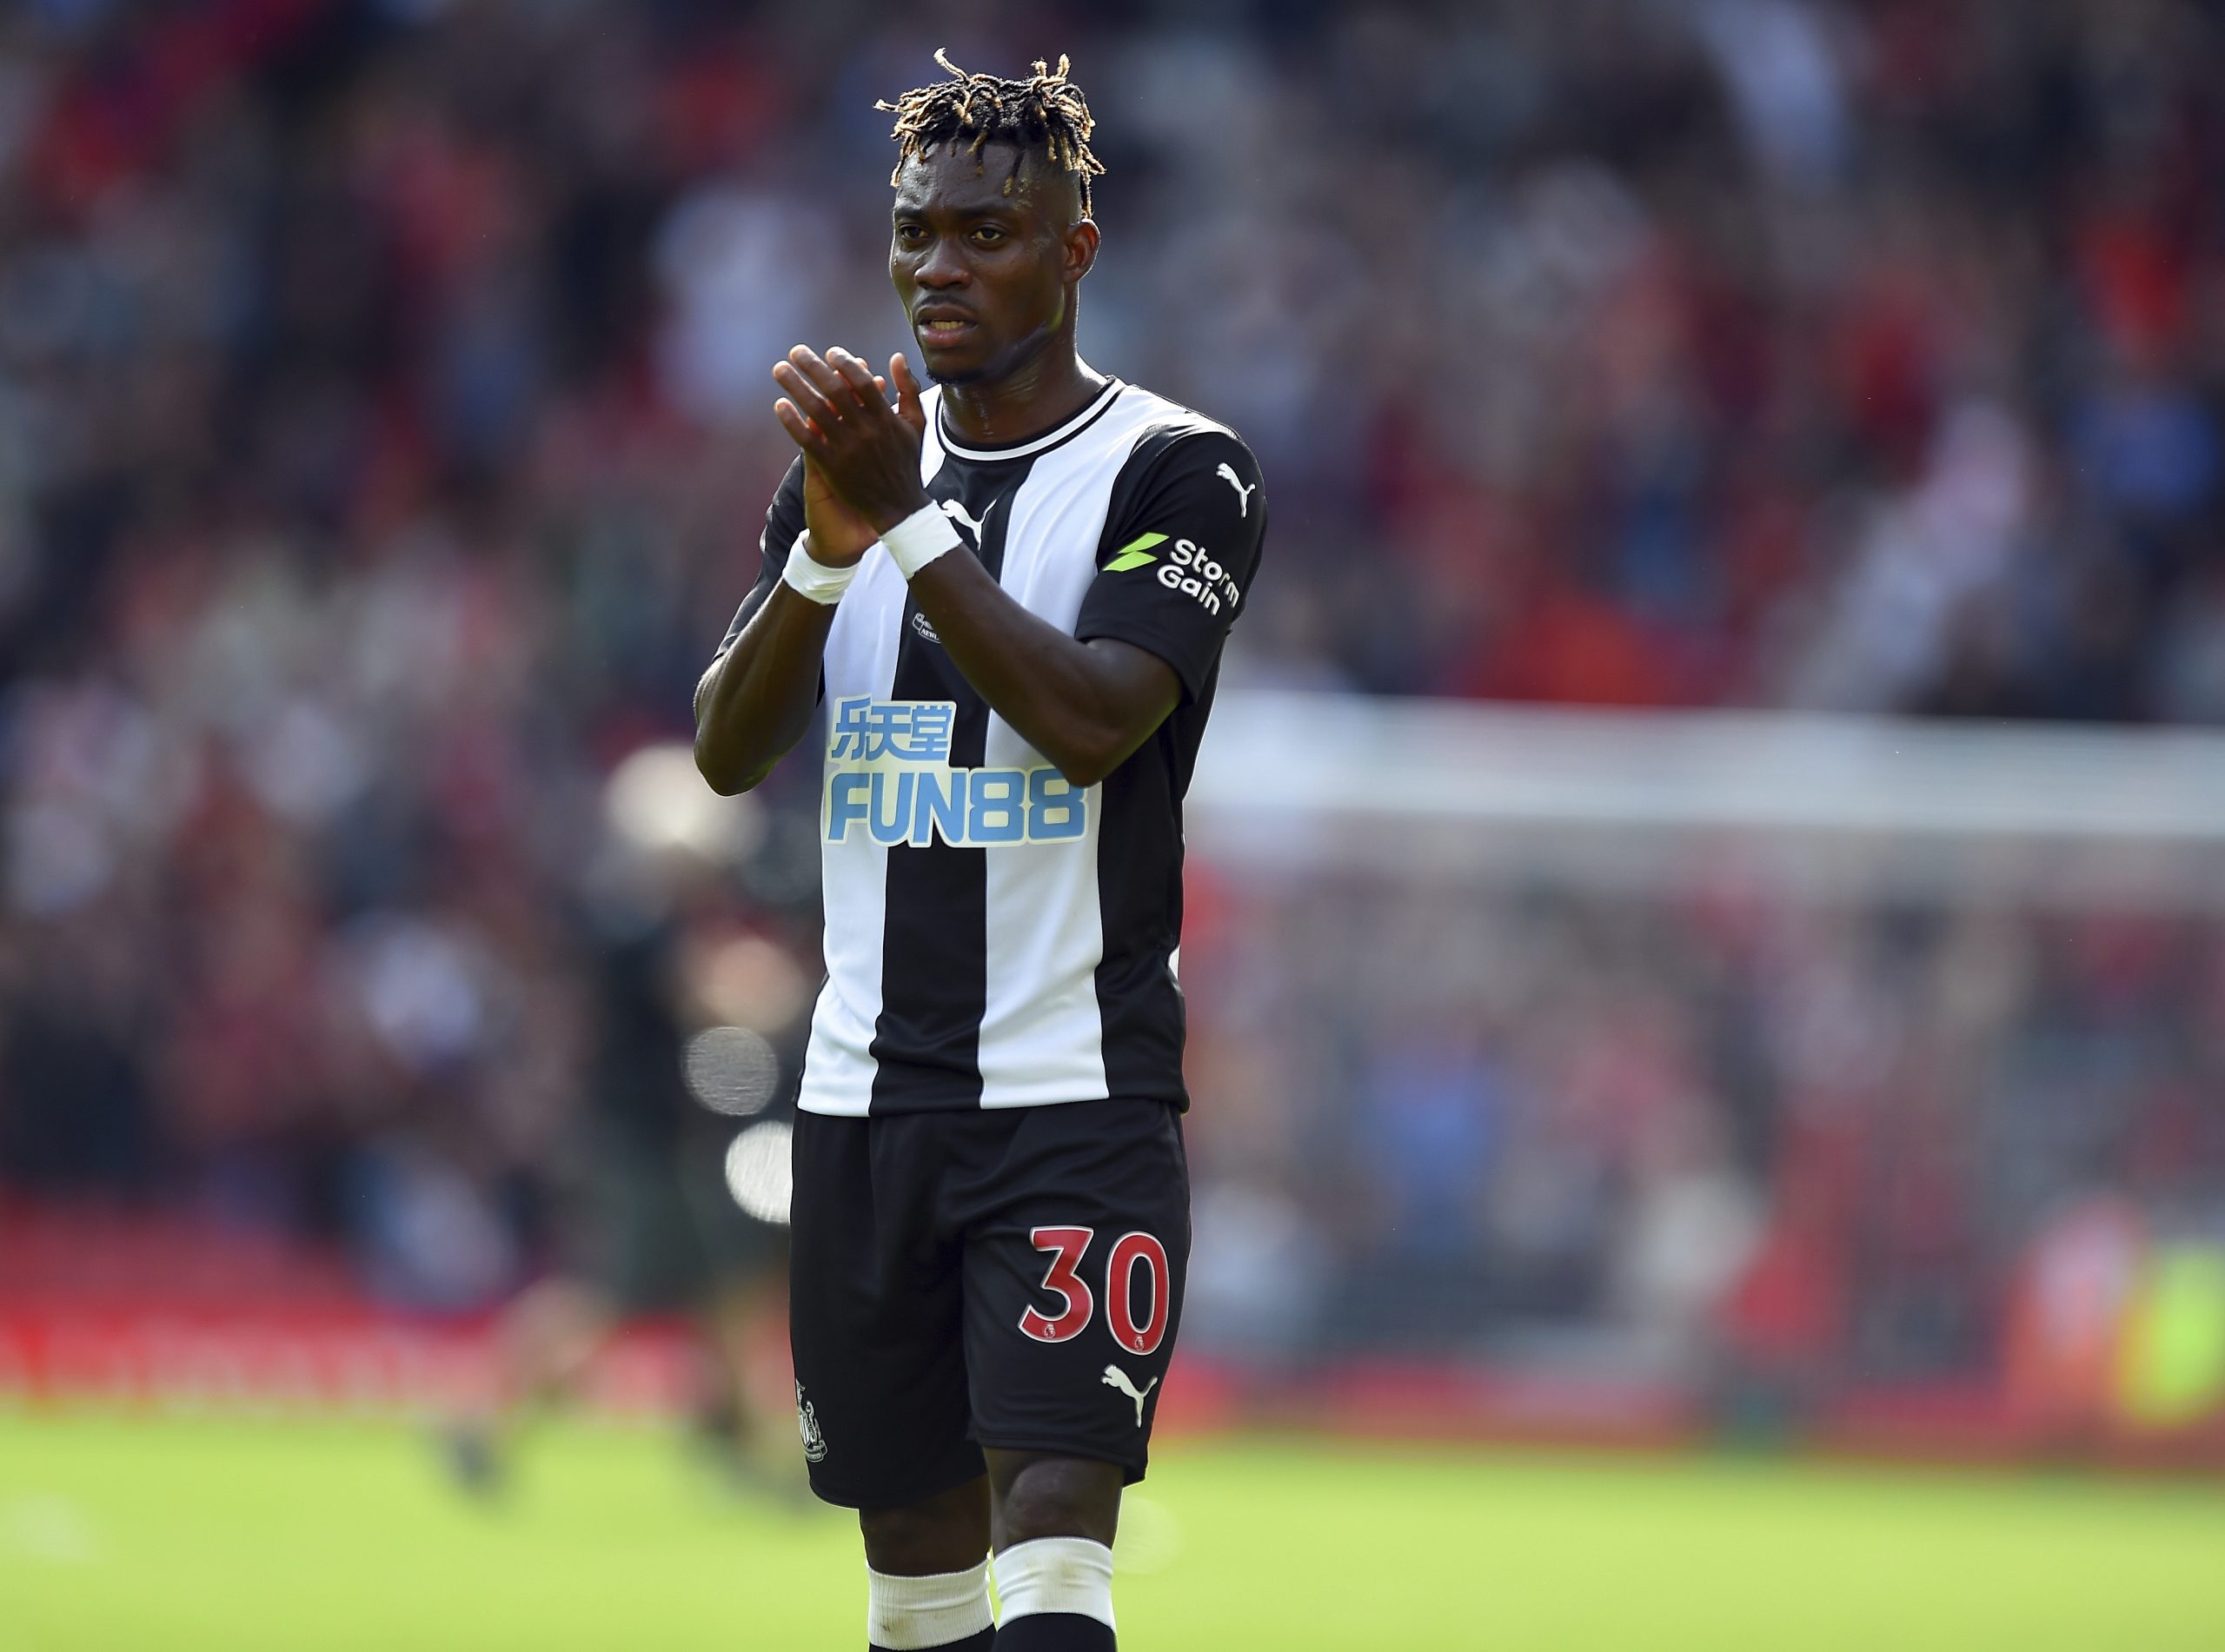 September 14, 2019, Liverpool, United Kingdom: Christian Atsu of Newcastle United thanks the fans at the end of the Premier League match at Anfield, Liverpool. Picture date: 14th September 2019. Picture credit should read: Robin Parker/Sportimage(Credit Image: © Robin Parker/CSM via ZUMA Wire) (Cal Sport Media via AP Images)